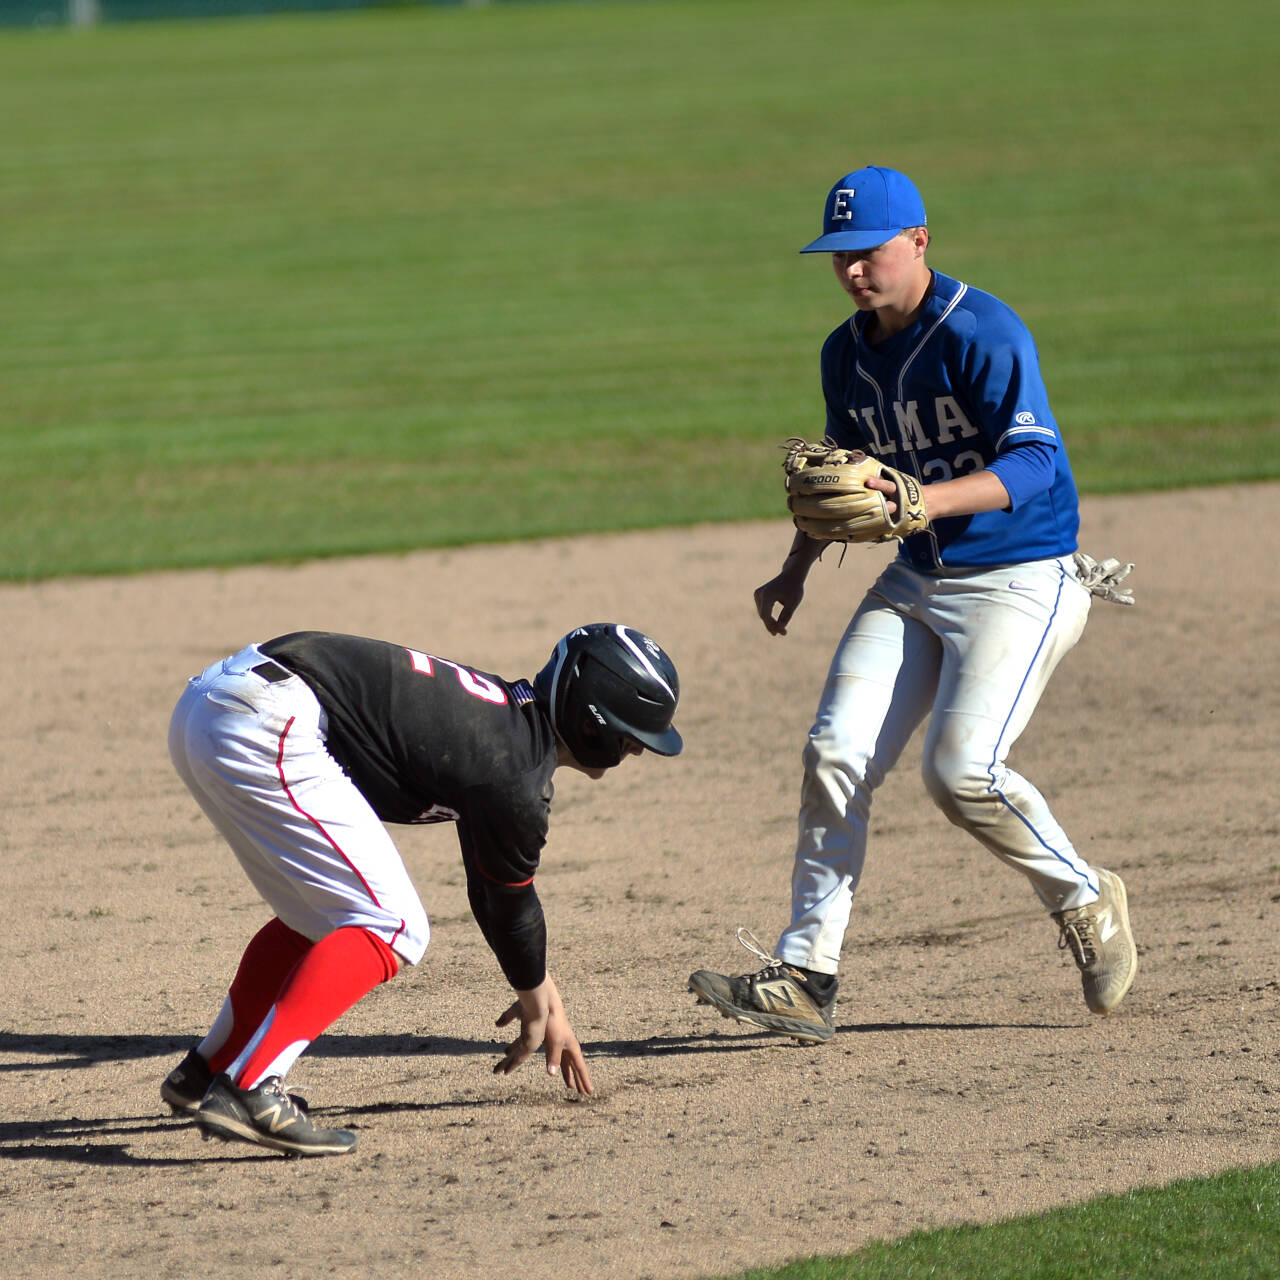 RYAN SPARKS | THE DAILY WORLD Elma 
infielder Blake Corr, right, tags out Tenino’s Carson Hart during a rundown in Elma’s 10-3 win in the 1A District 4 baseball semifinals on Tuesday, May 10, 2022, in Hoquiam.